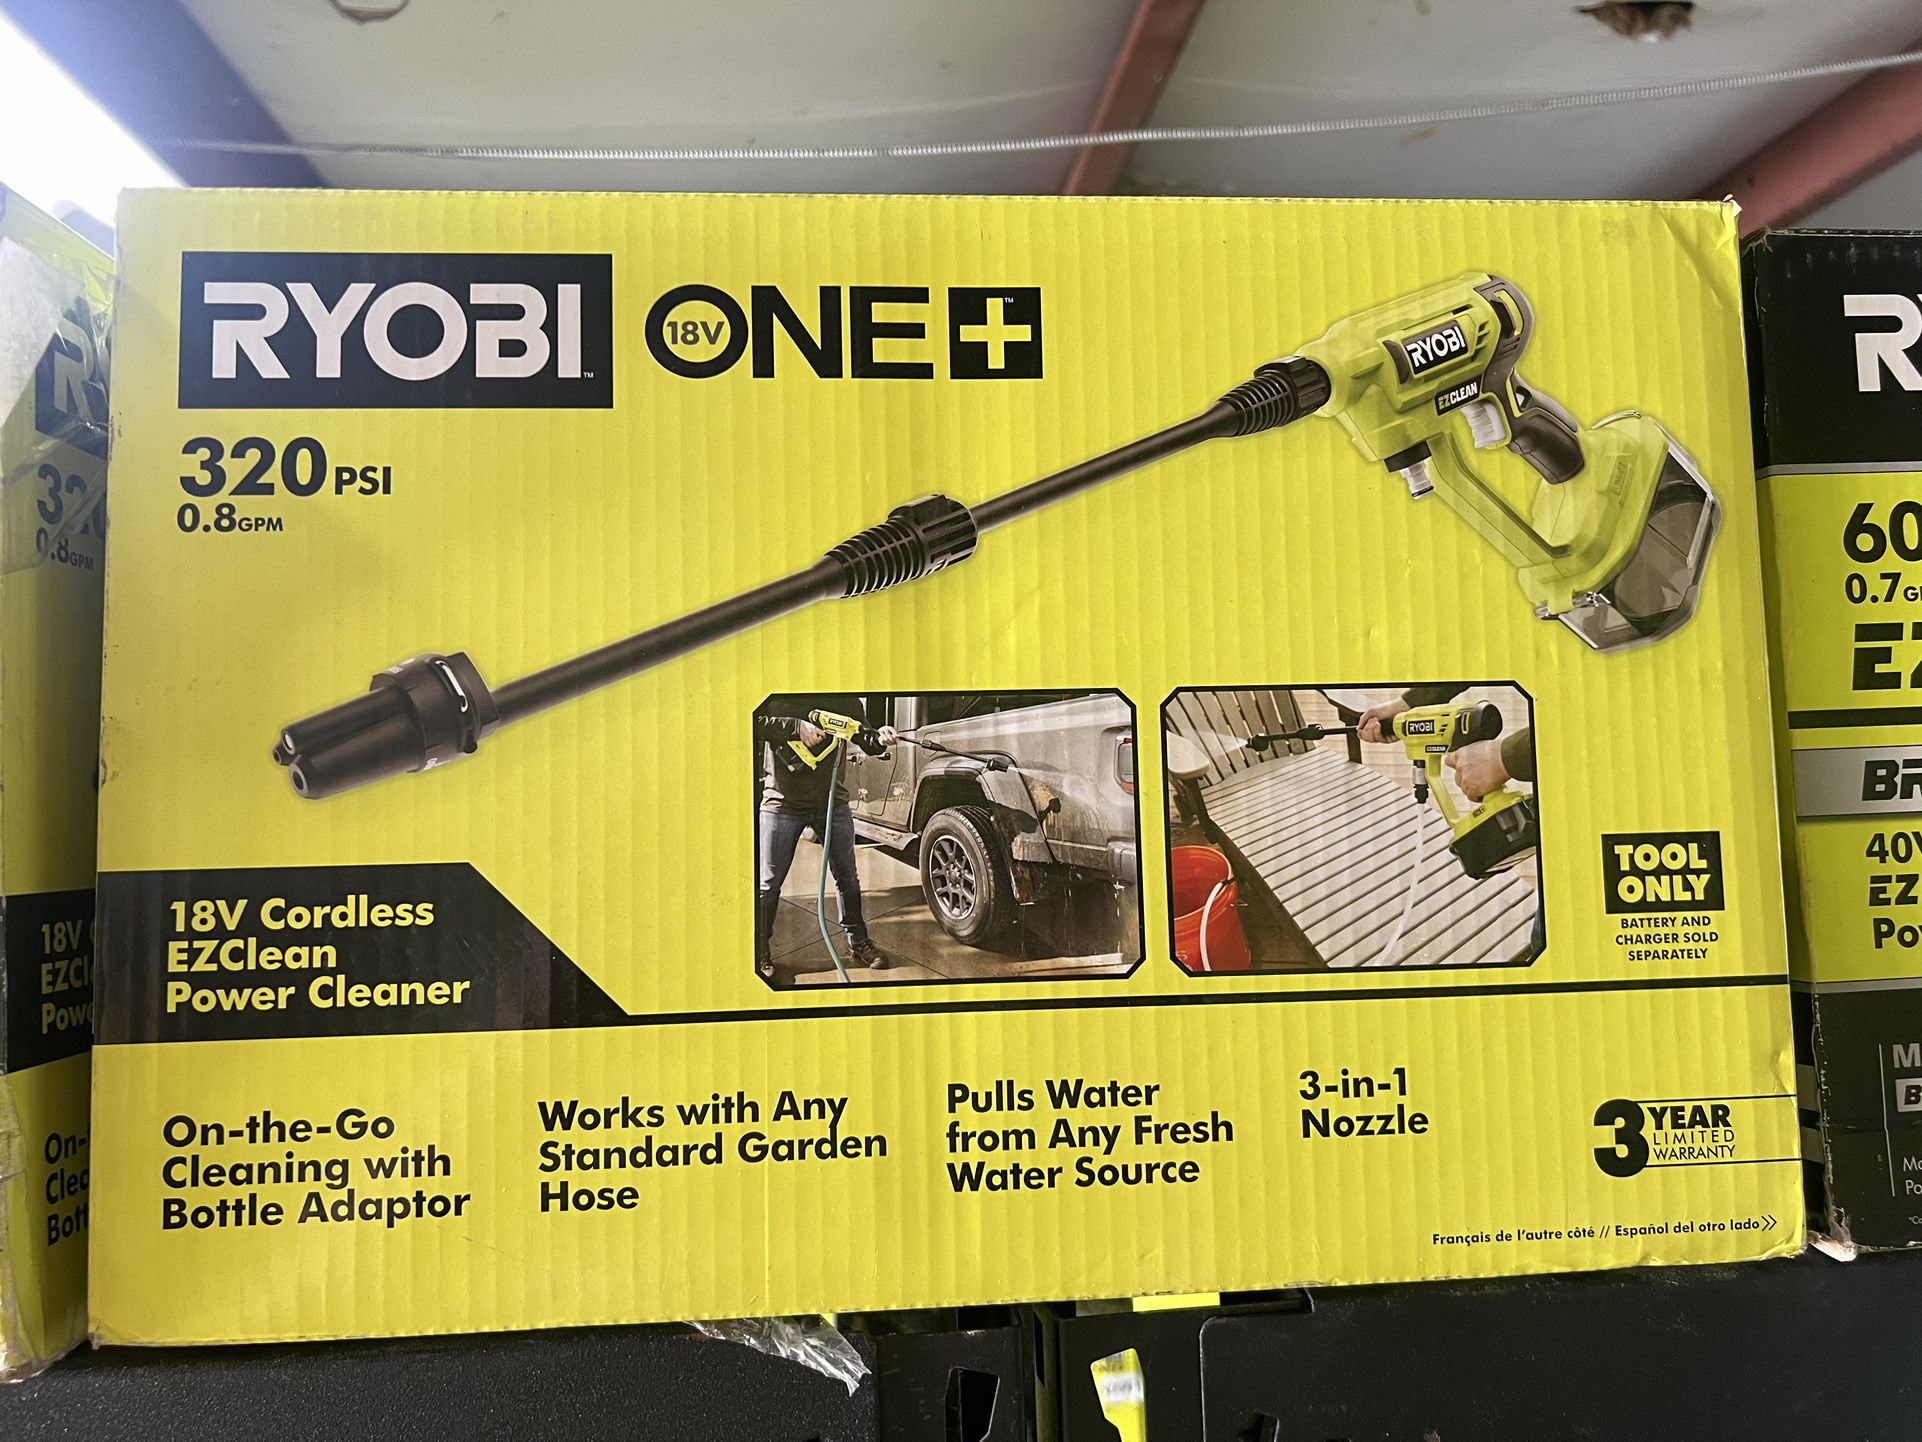 RYOBI ONE+ 18V EZClean 320 PSI 0.8 GPM Cordless Battery Cold Water Power Cleaner (Tool Only